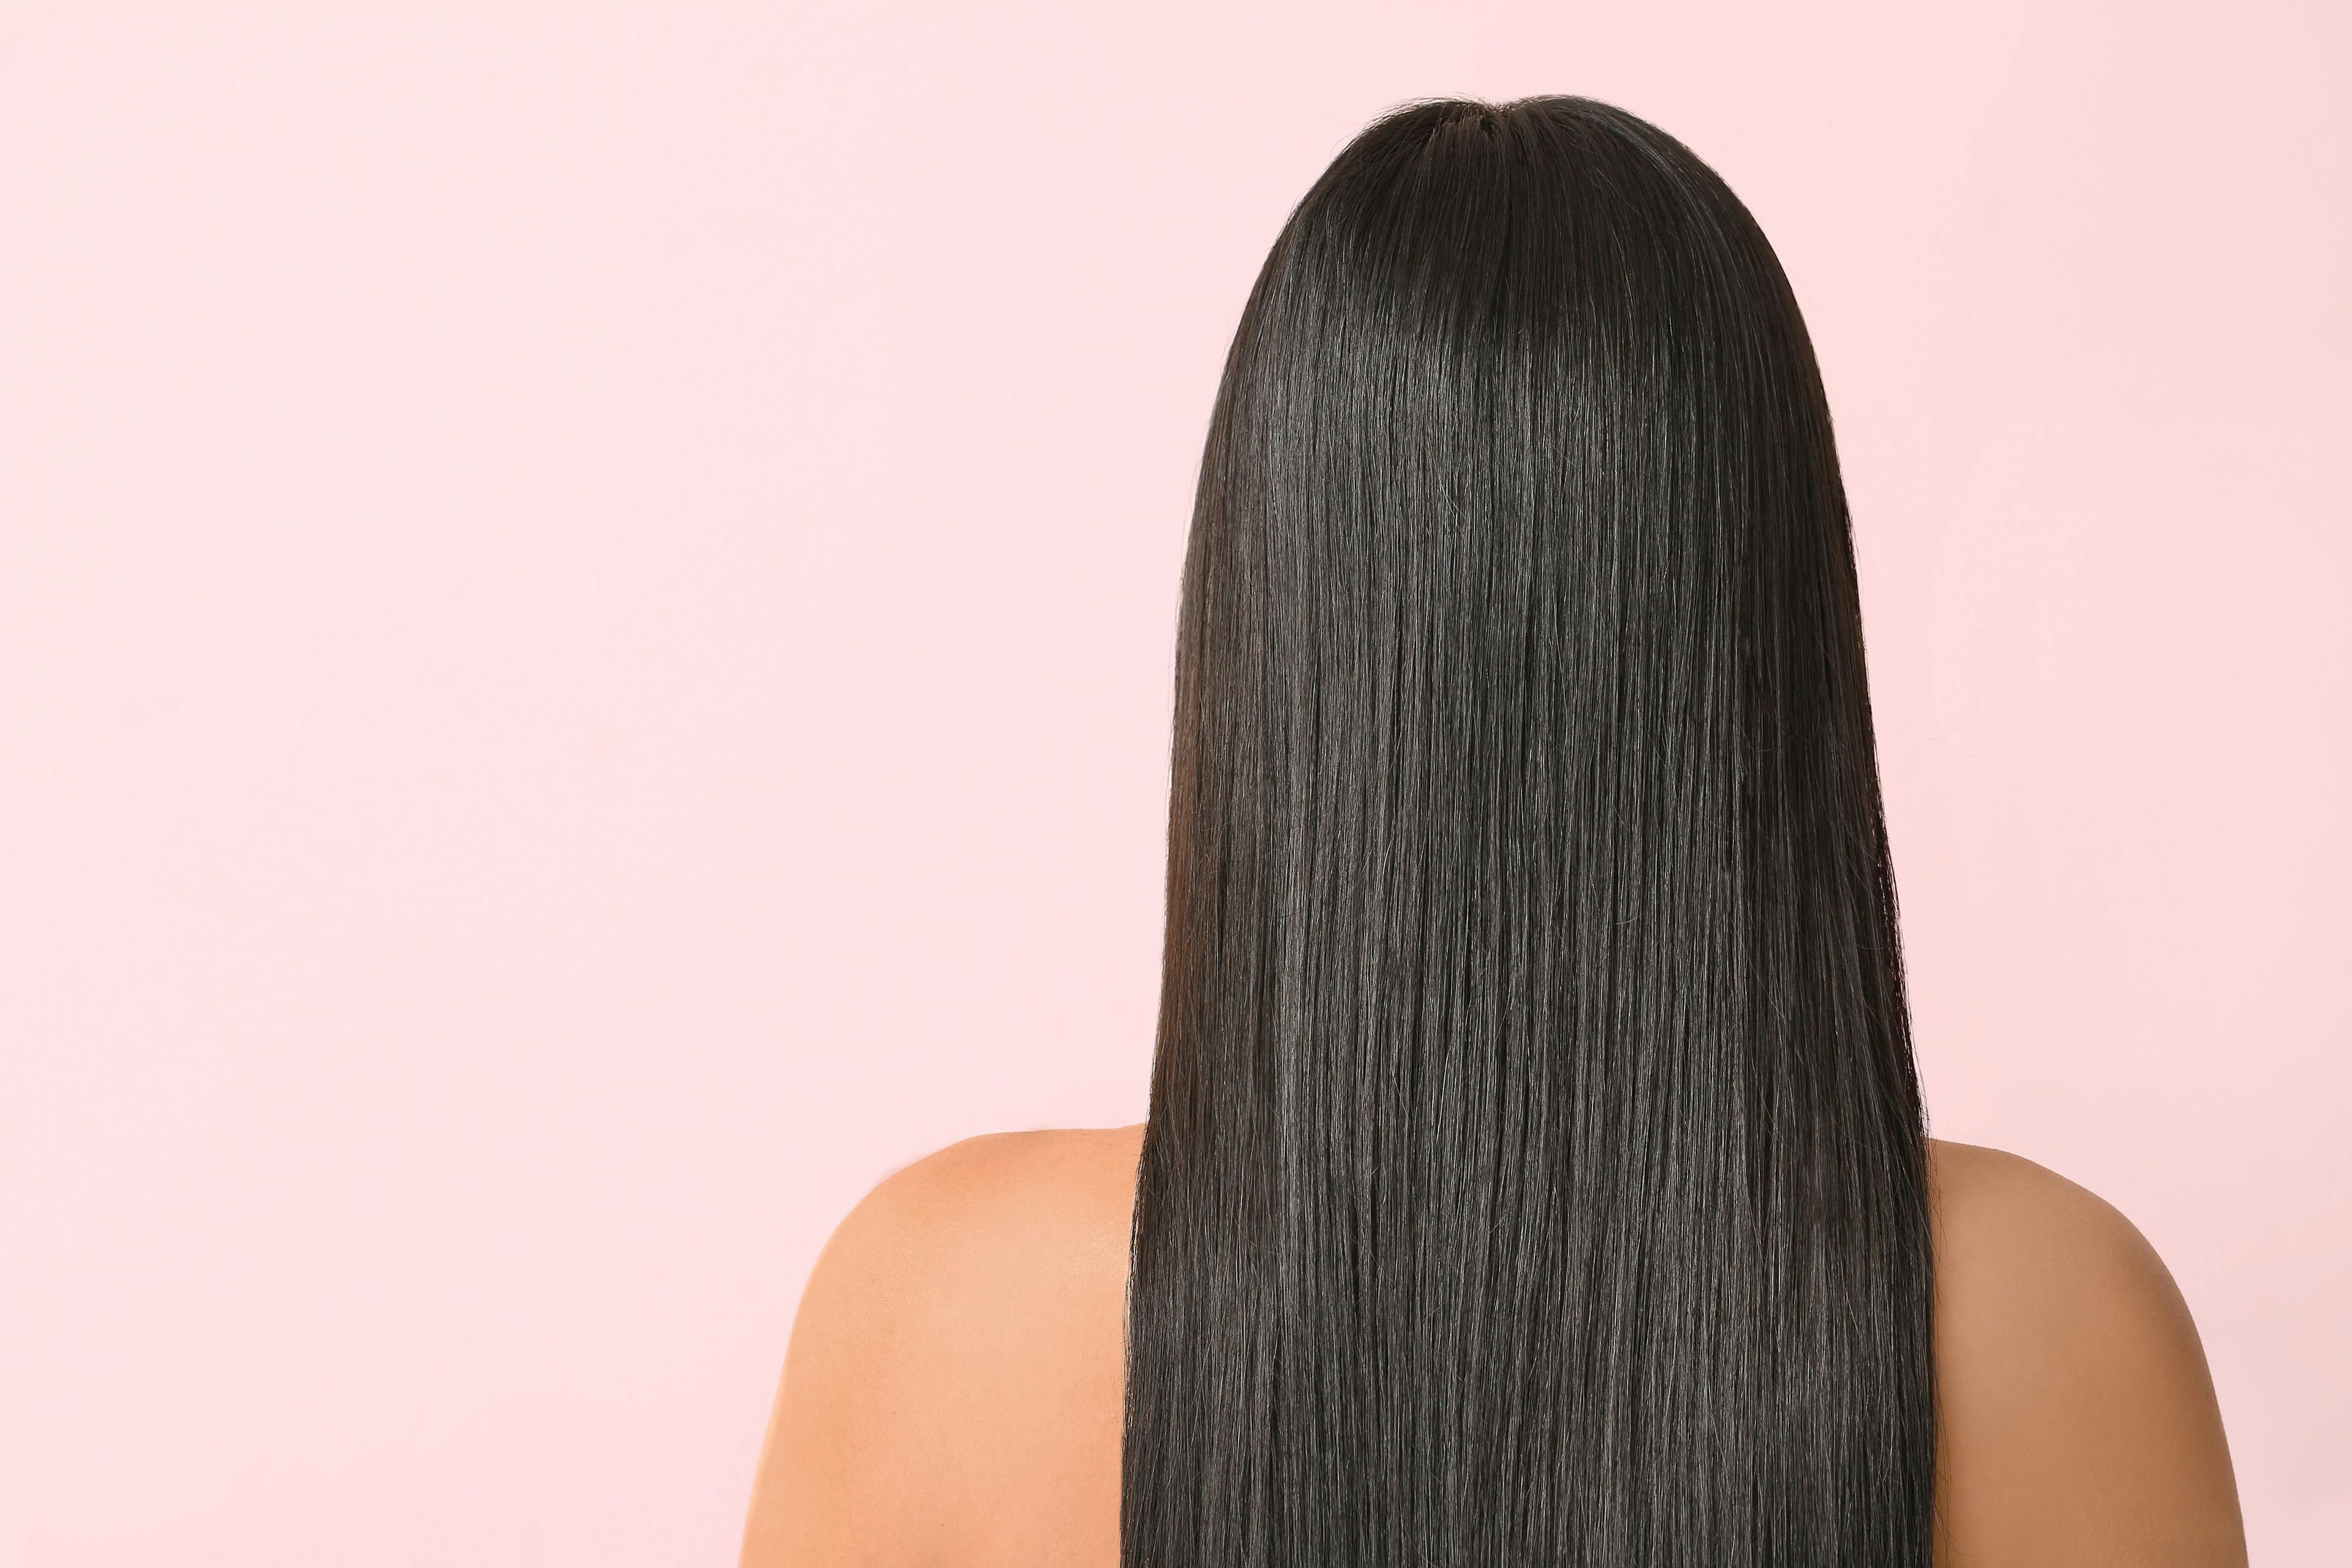 Chemical hair straightening may increase uterine cancer risk